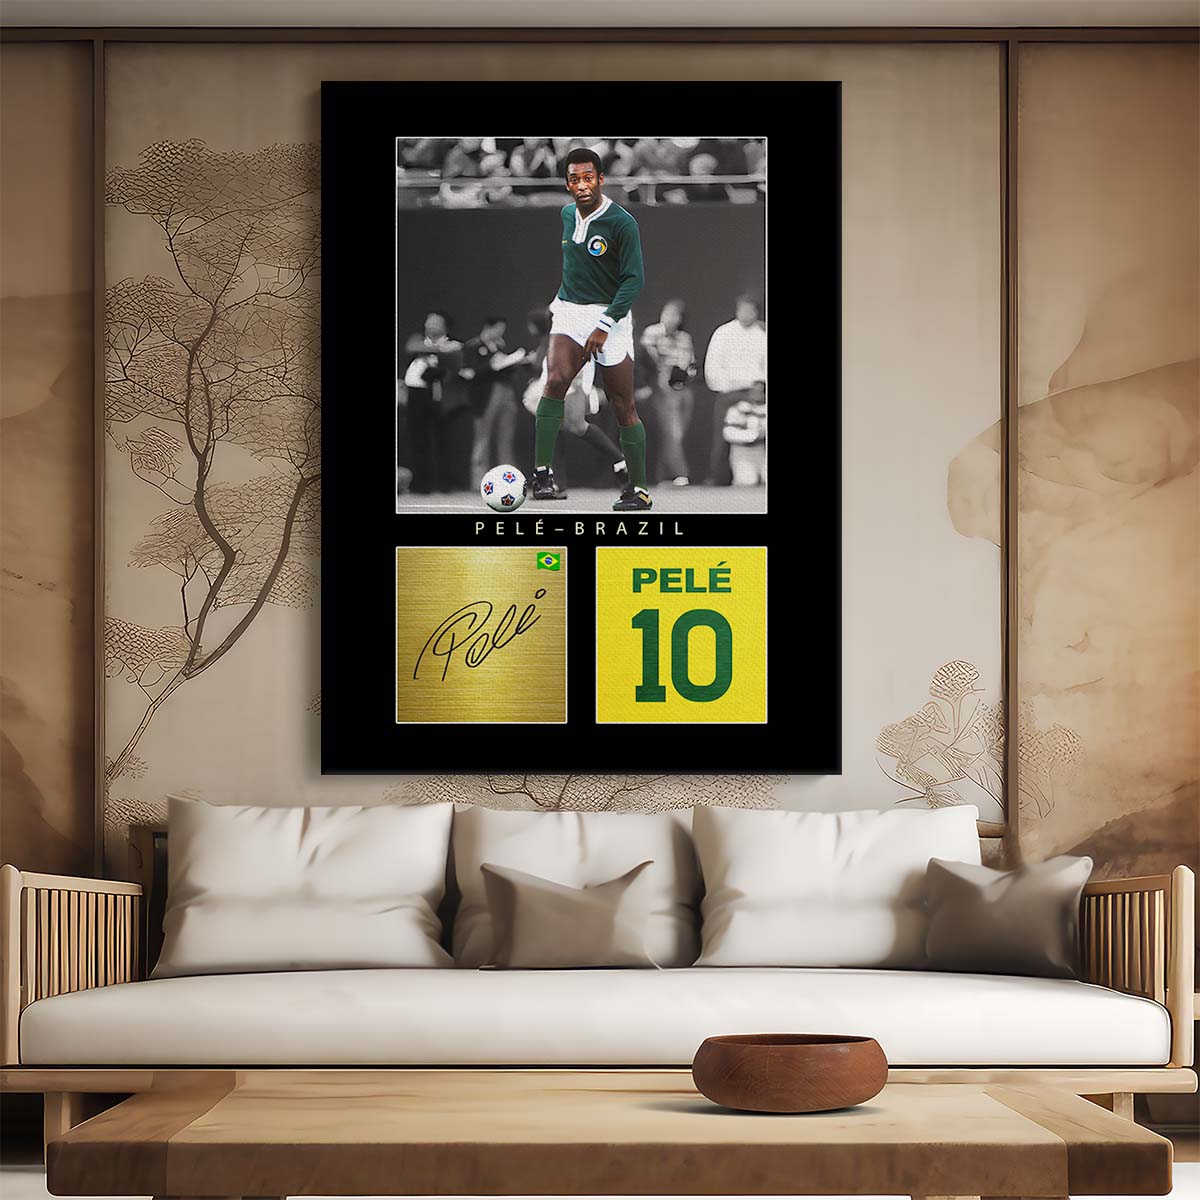 Pele Brazil World Cup Signature Wall Art by Luxuriance Designs. Made in USA.